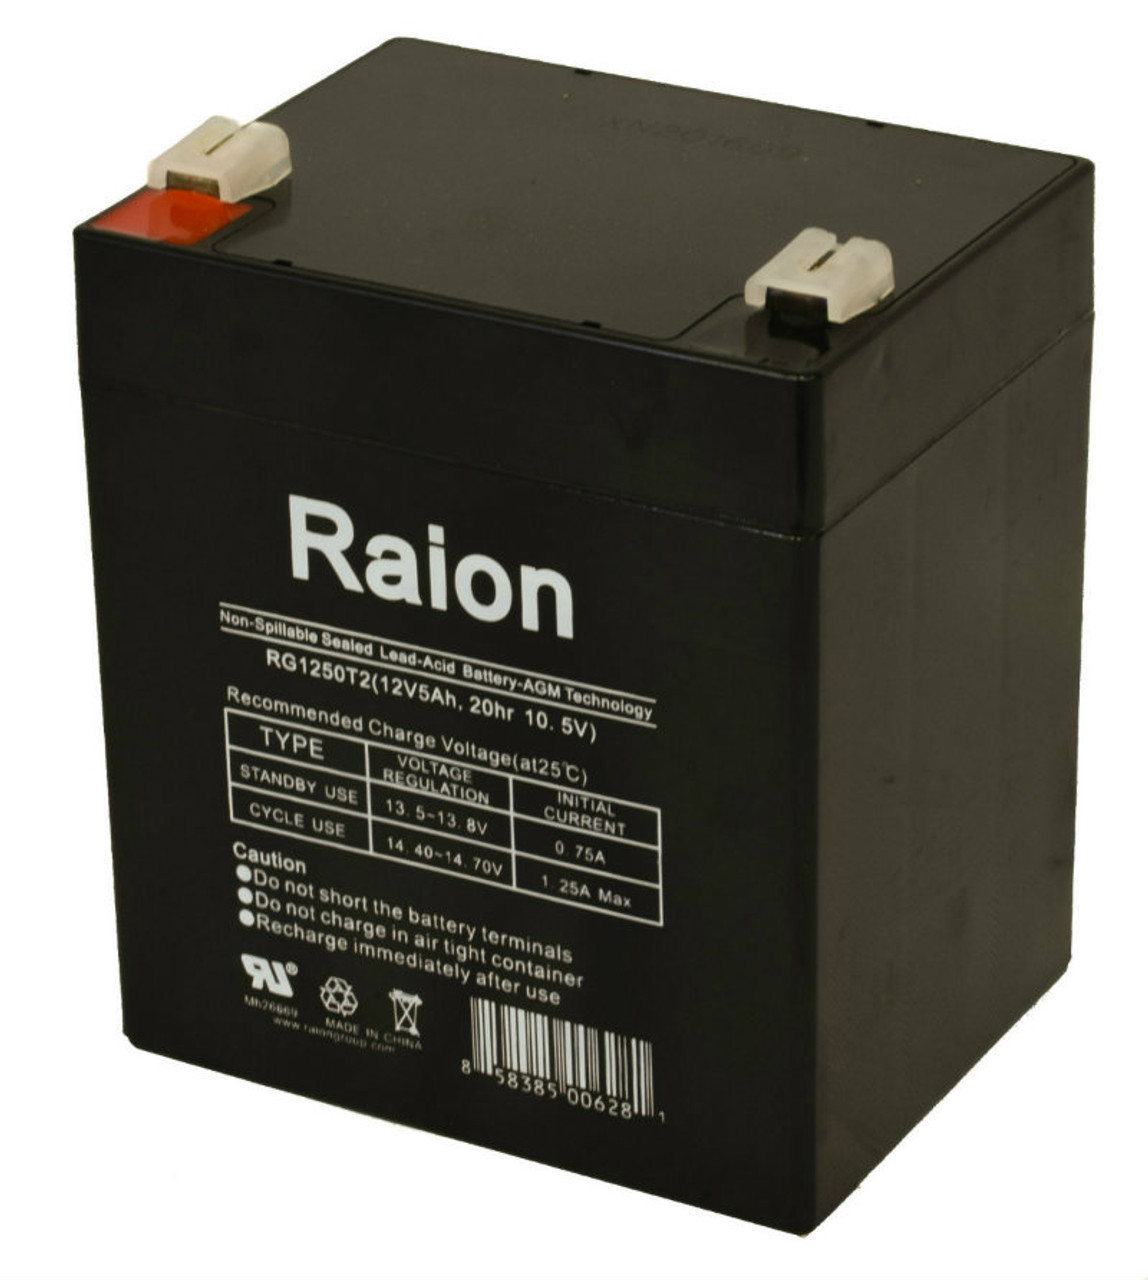 Raion Power RG1250T1 Replacement Alarm Security System Battery for Ademco Vista 20PUL